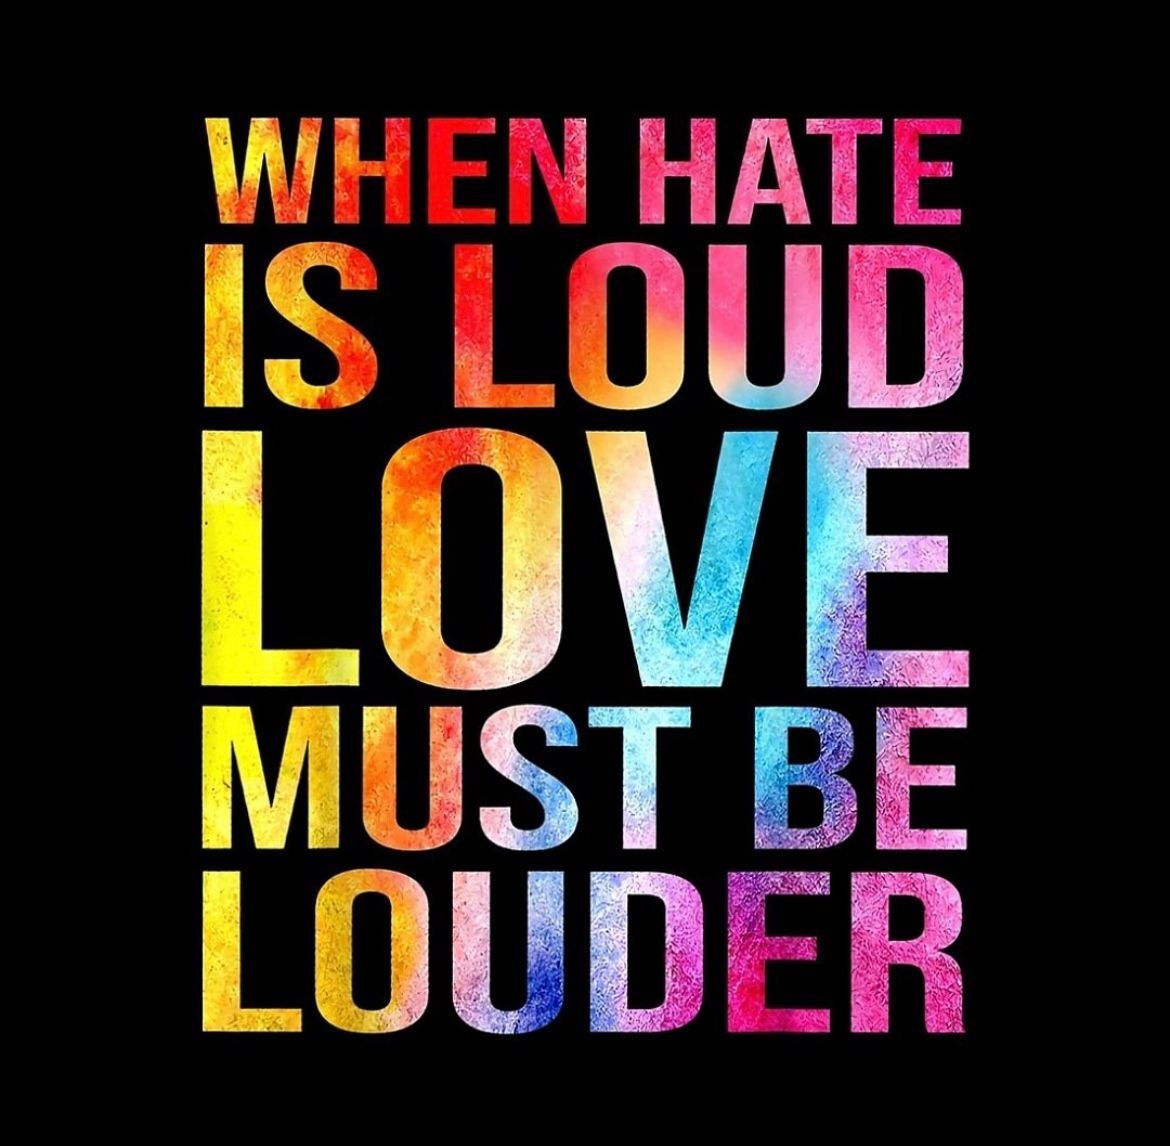 When hate is loud, love must be louder. Repost from @nationalnow. #CNYNOW #LGBTQ #LGBTQIA #Equality #EqualRights #EqualAccess #LoveIsLove #LGBTQCommunity LGBTQSupport #QueerPride